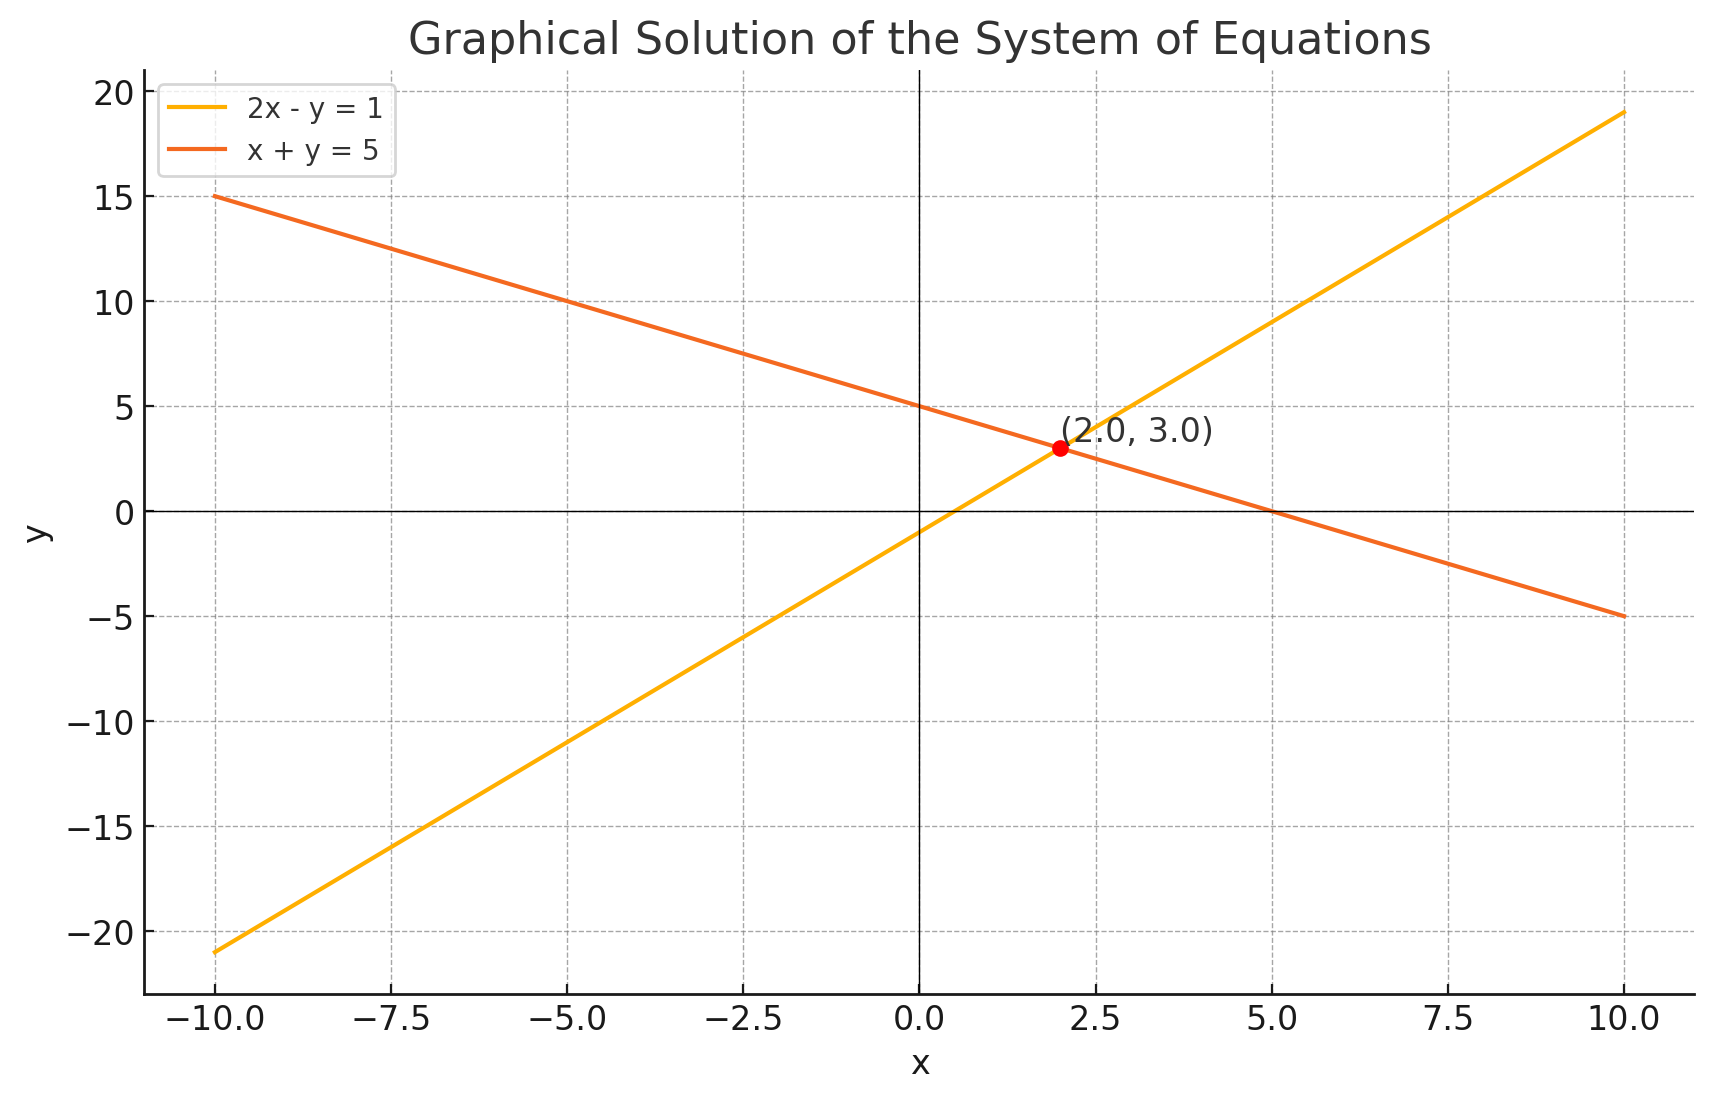 Solution to the system using lines. (Source: ChatGPT/matplotlib)